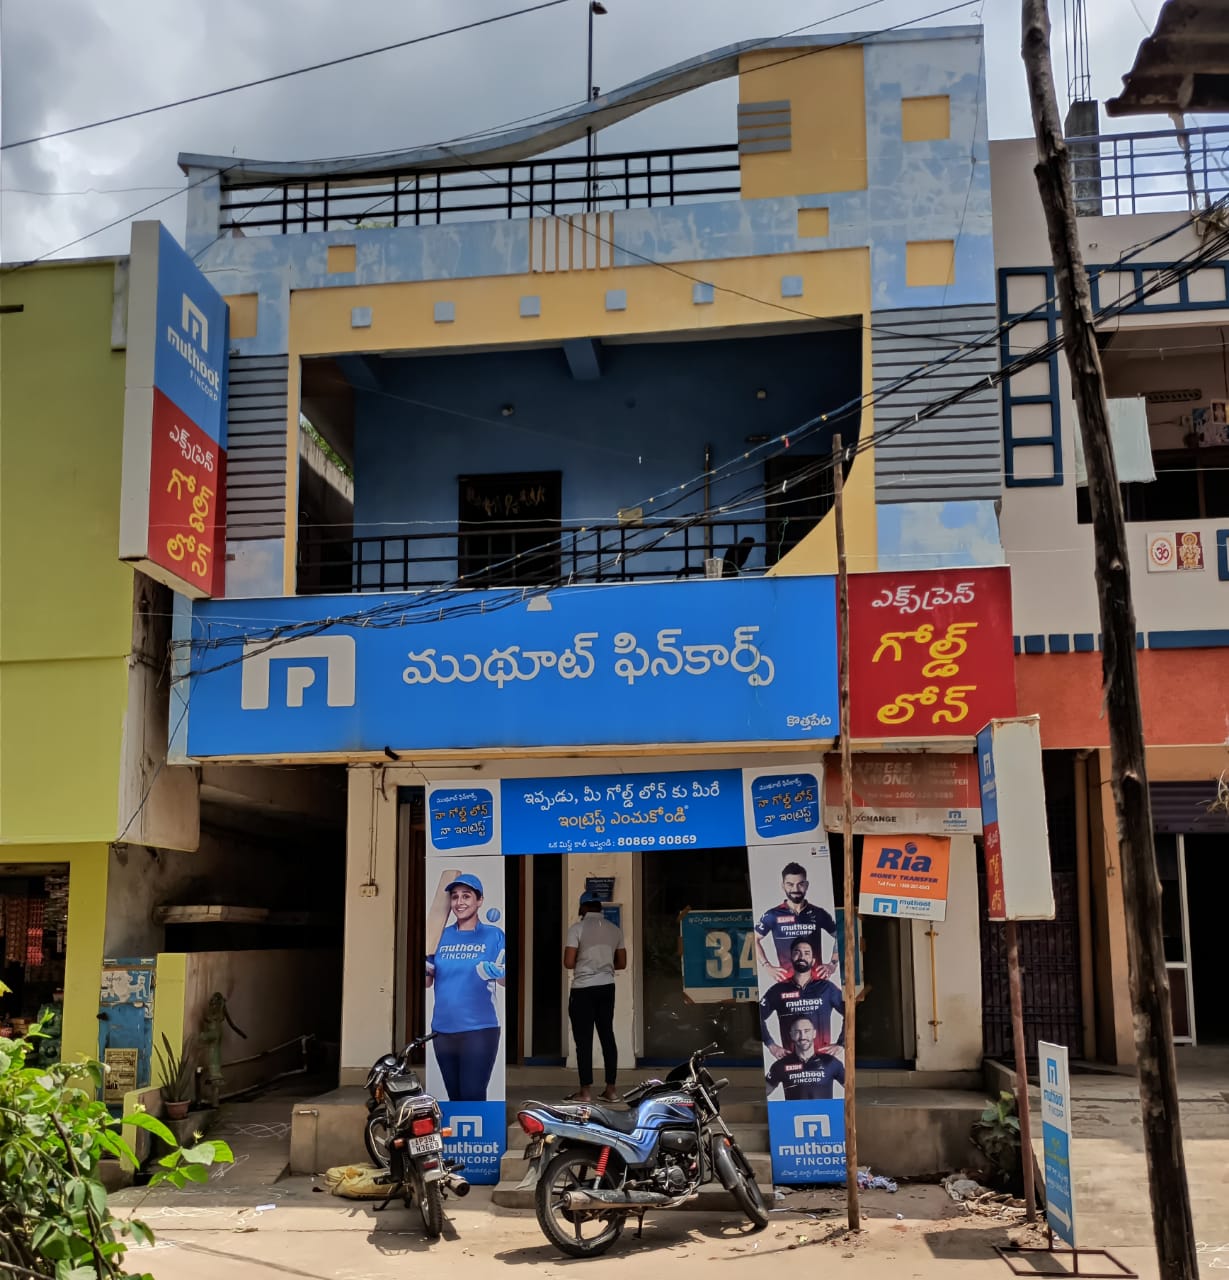 Photos and Videos of Muthoot Fincorp Gold Loan in Kothapeta, East Godavari